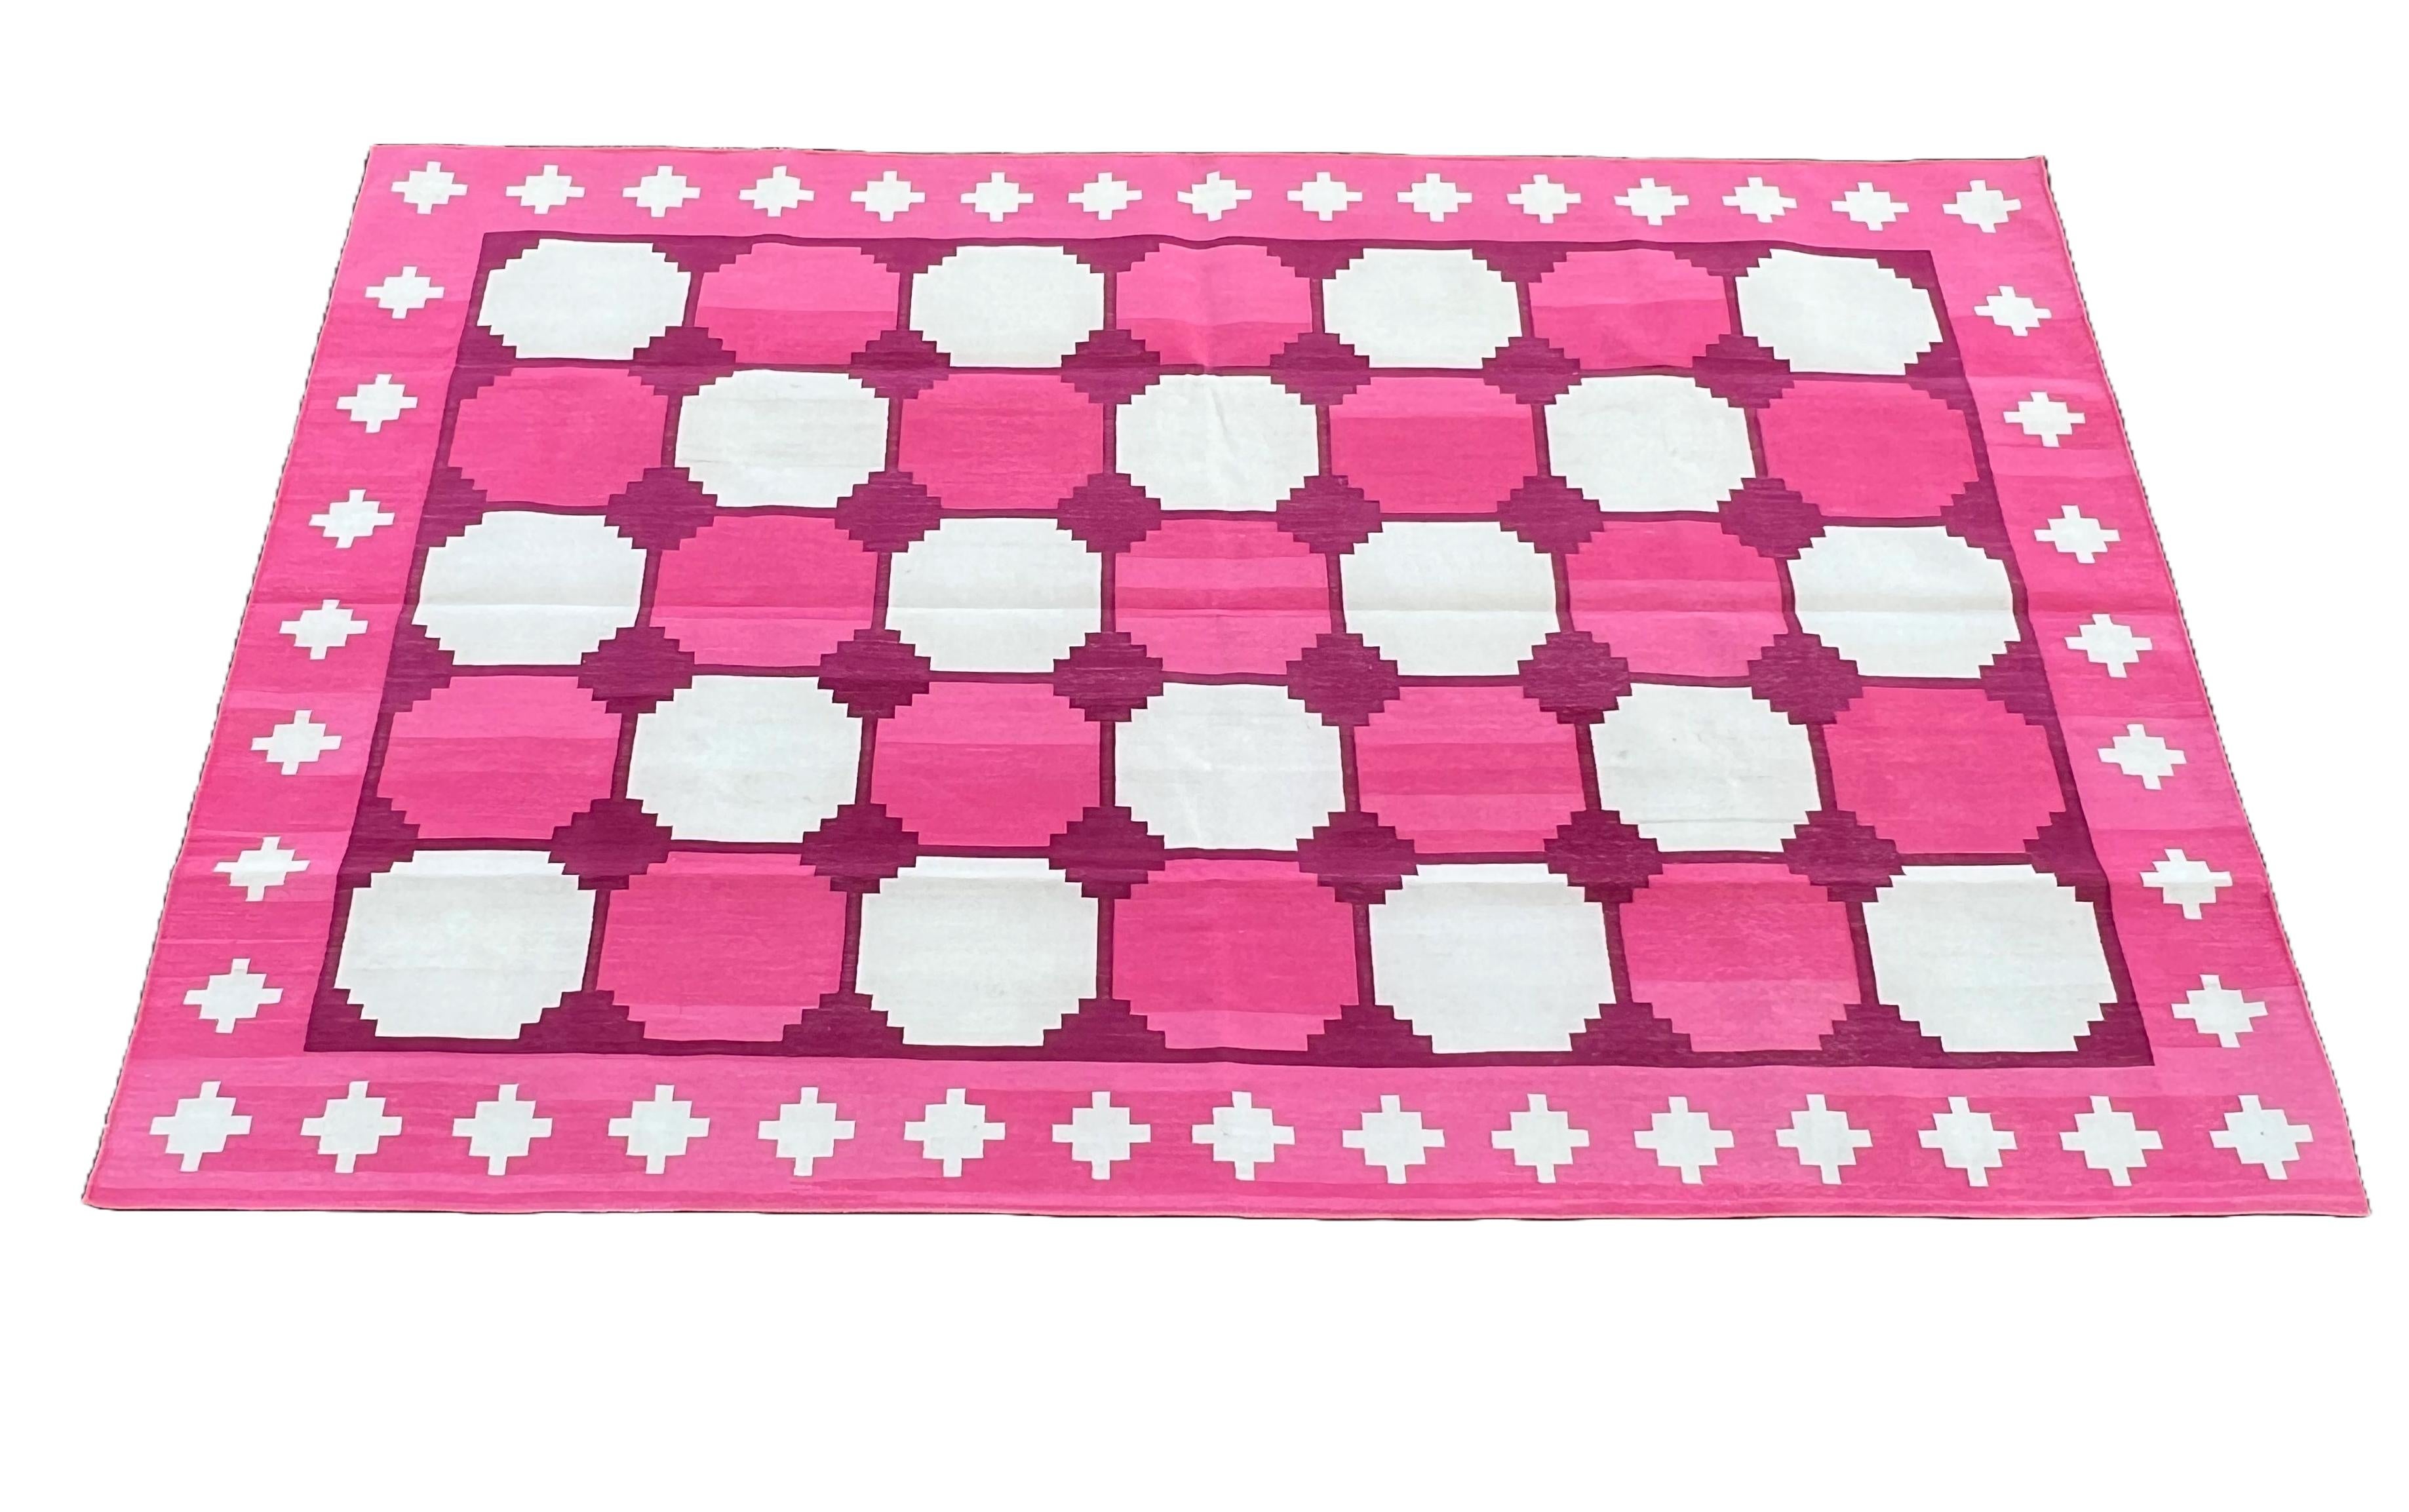 Hand-Woven Handmade Cotton Area Flat Weave Rug, Pink & White Indian Star Geometric Dhurrie For Sale